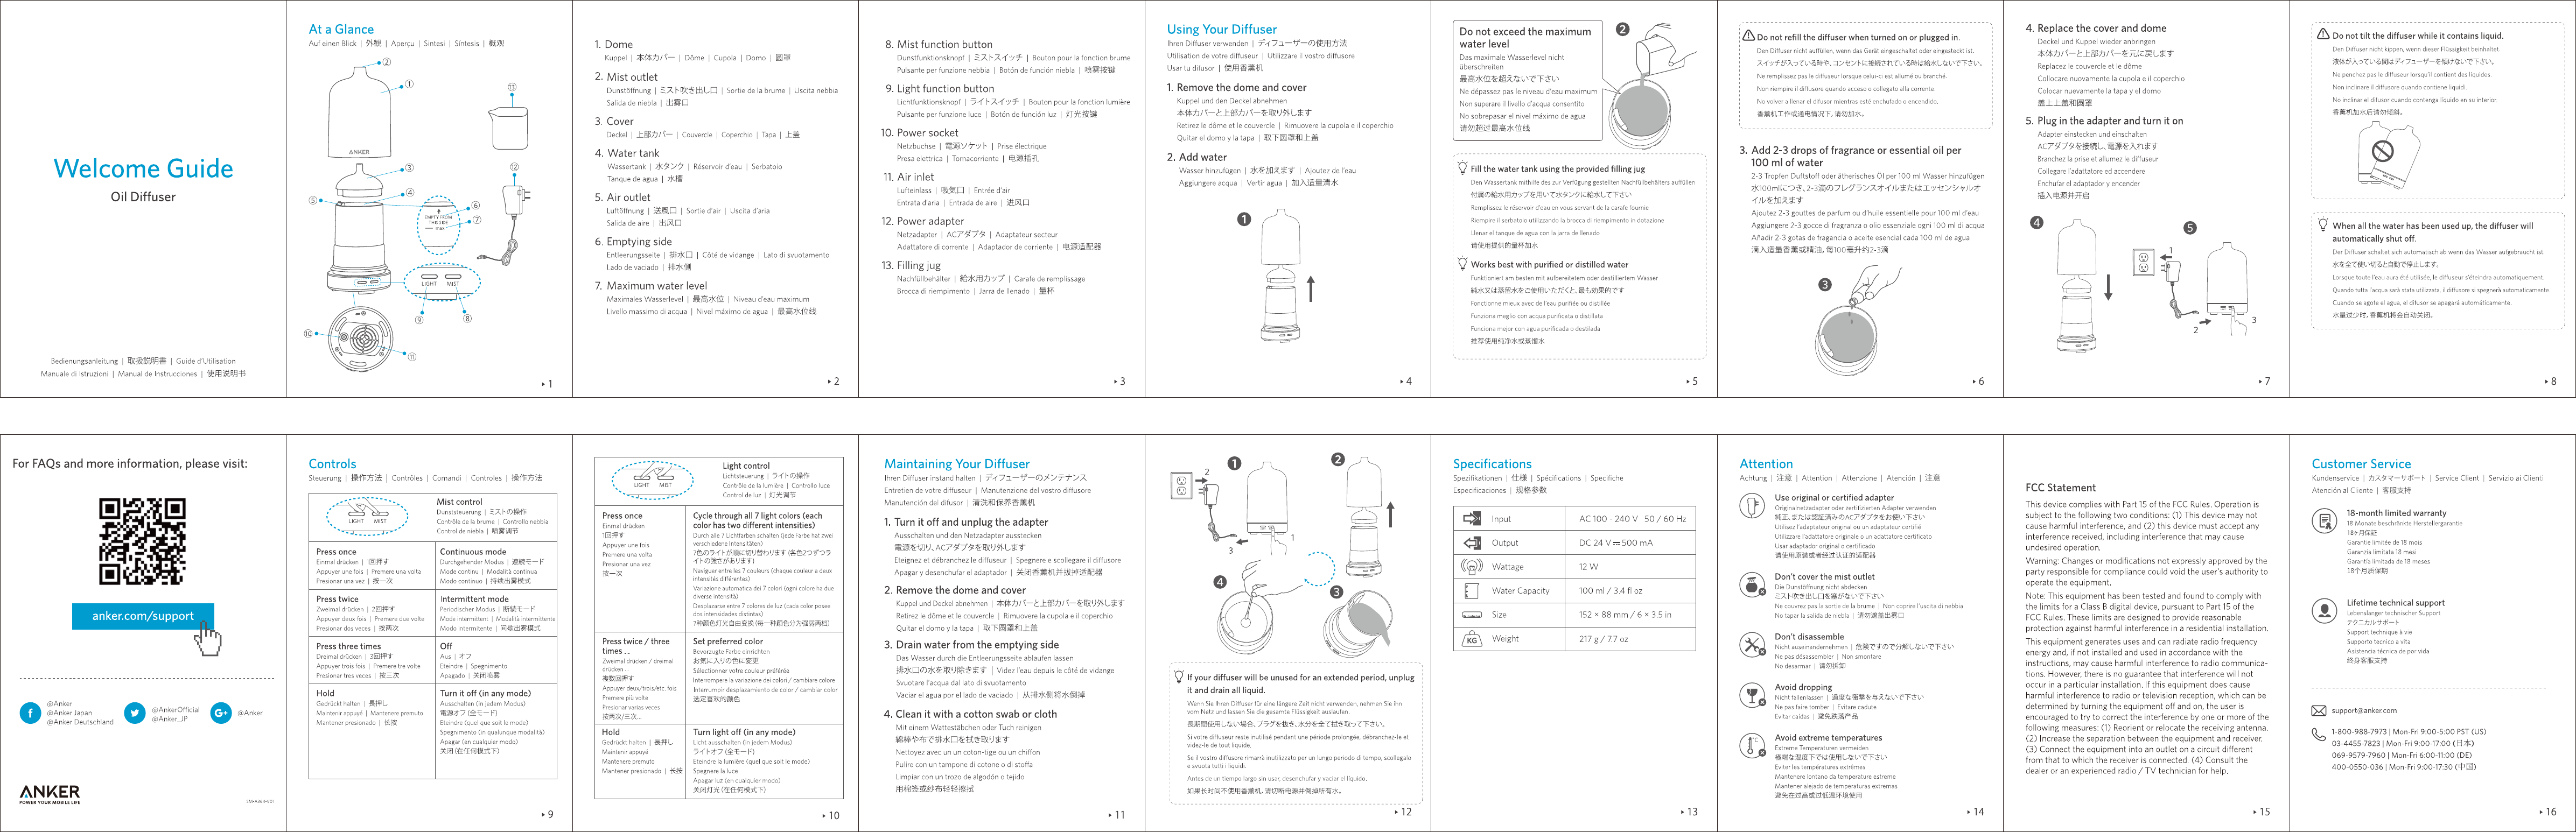 Page 1 of 1 - Anker T3210_manual_SM-A364-V01_20160126_outline Manual T3210